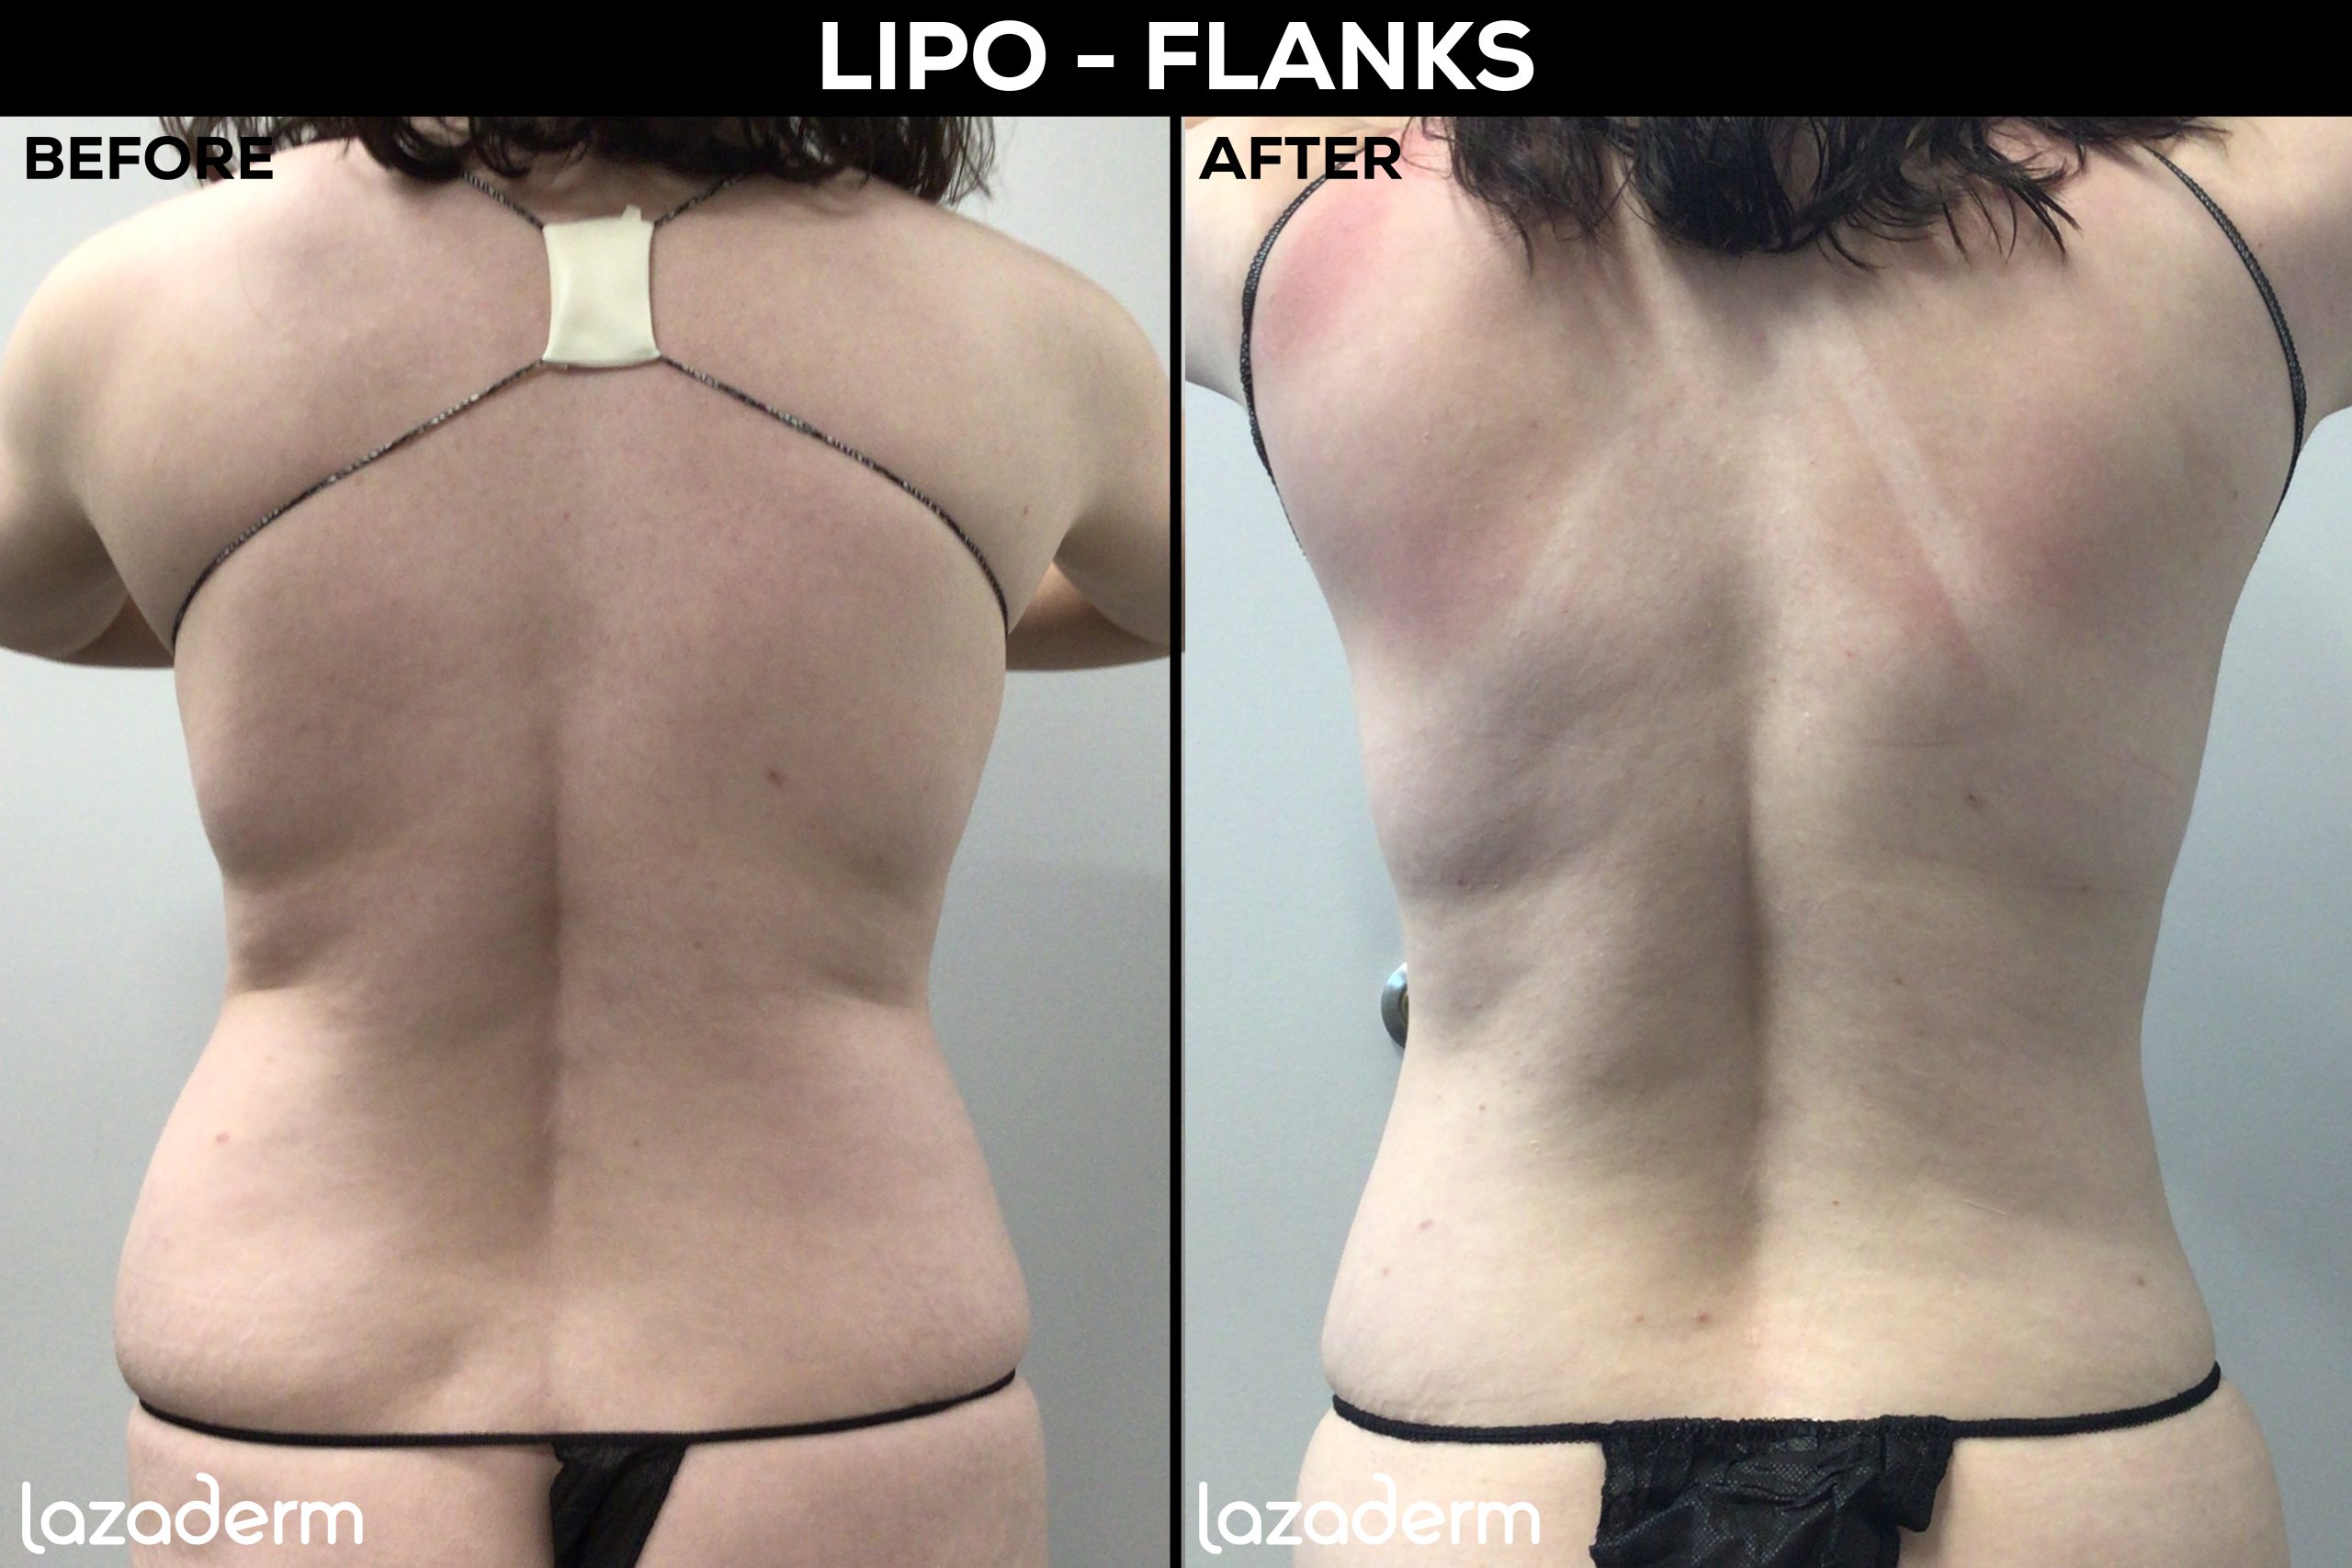 Liposuction Back and Flanks Treatment Gallery in New Bern, NC